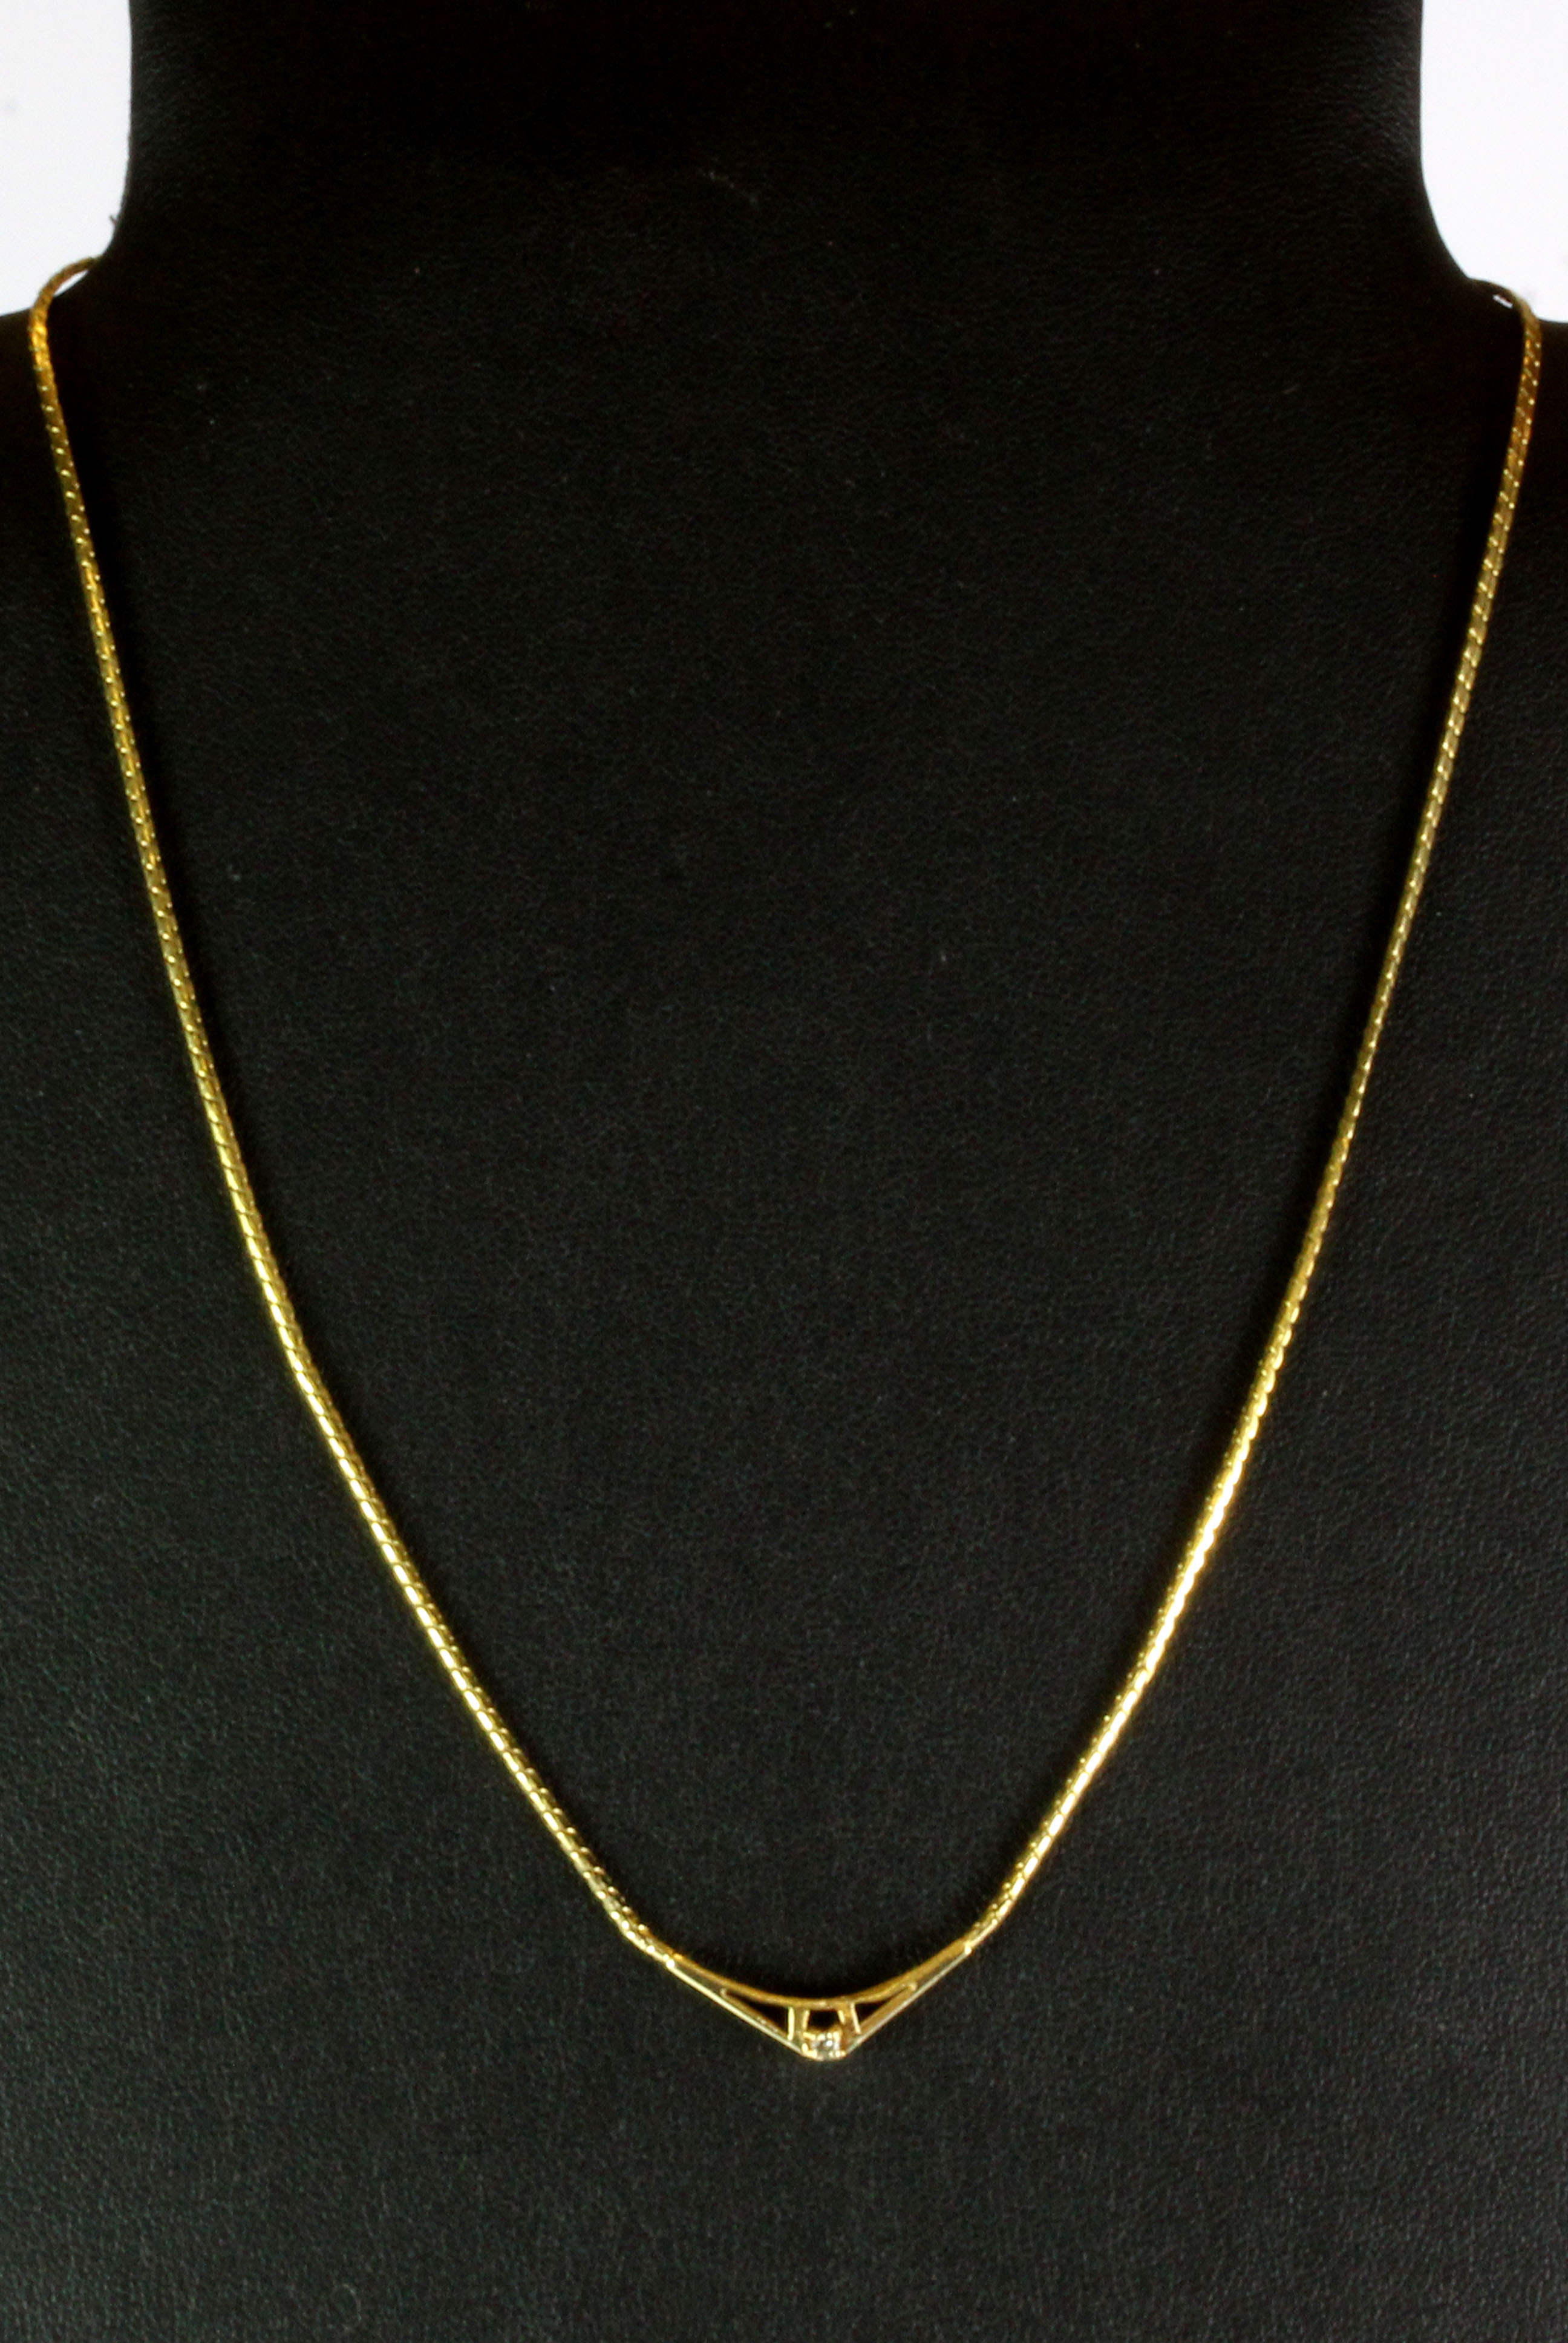 A 9ct yellow gold diamond set necklace together with a 9ct gold cross pendant, approx. 6.2g. - Image 2 of 2